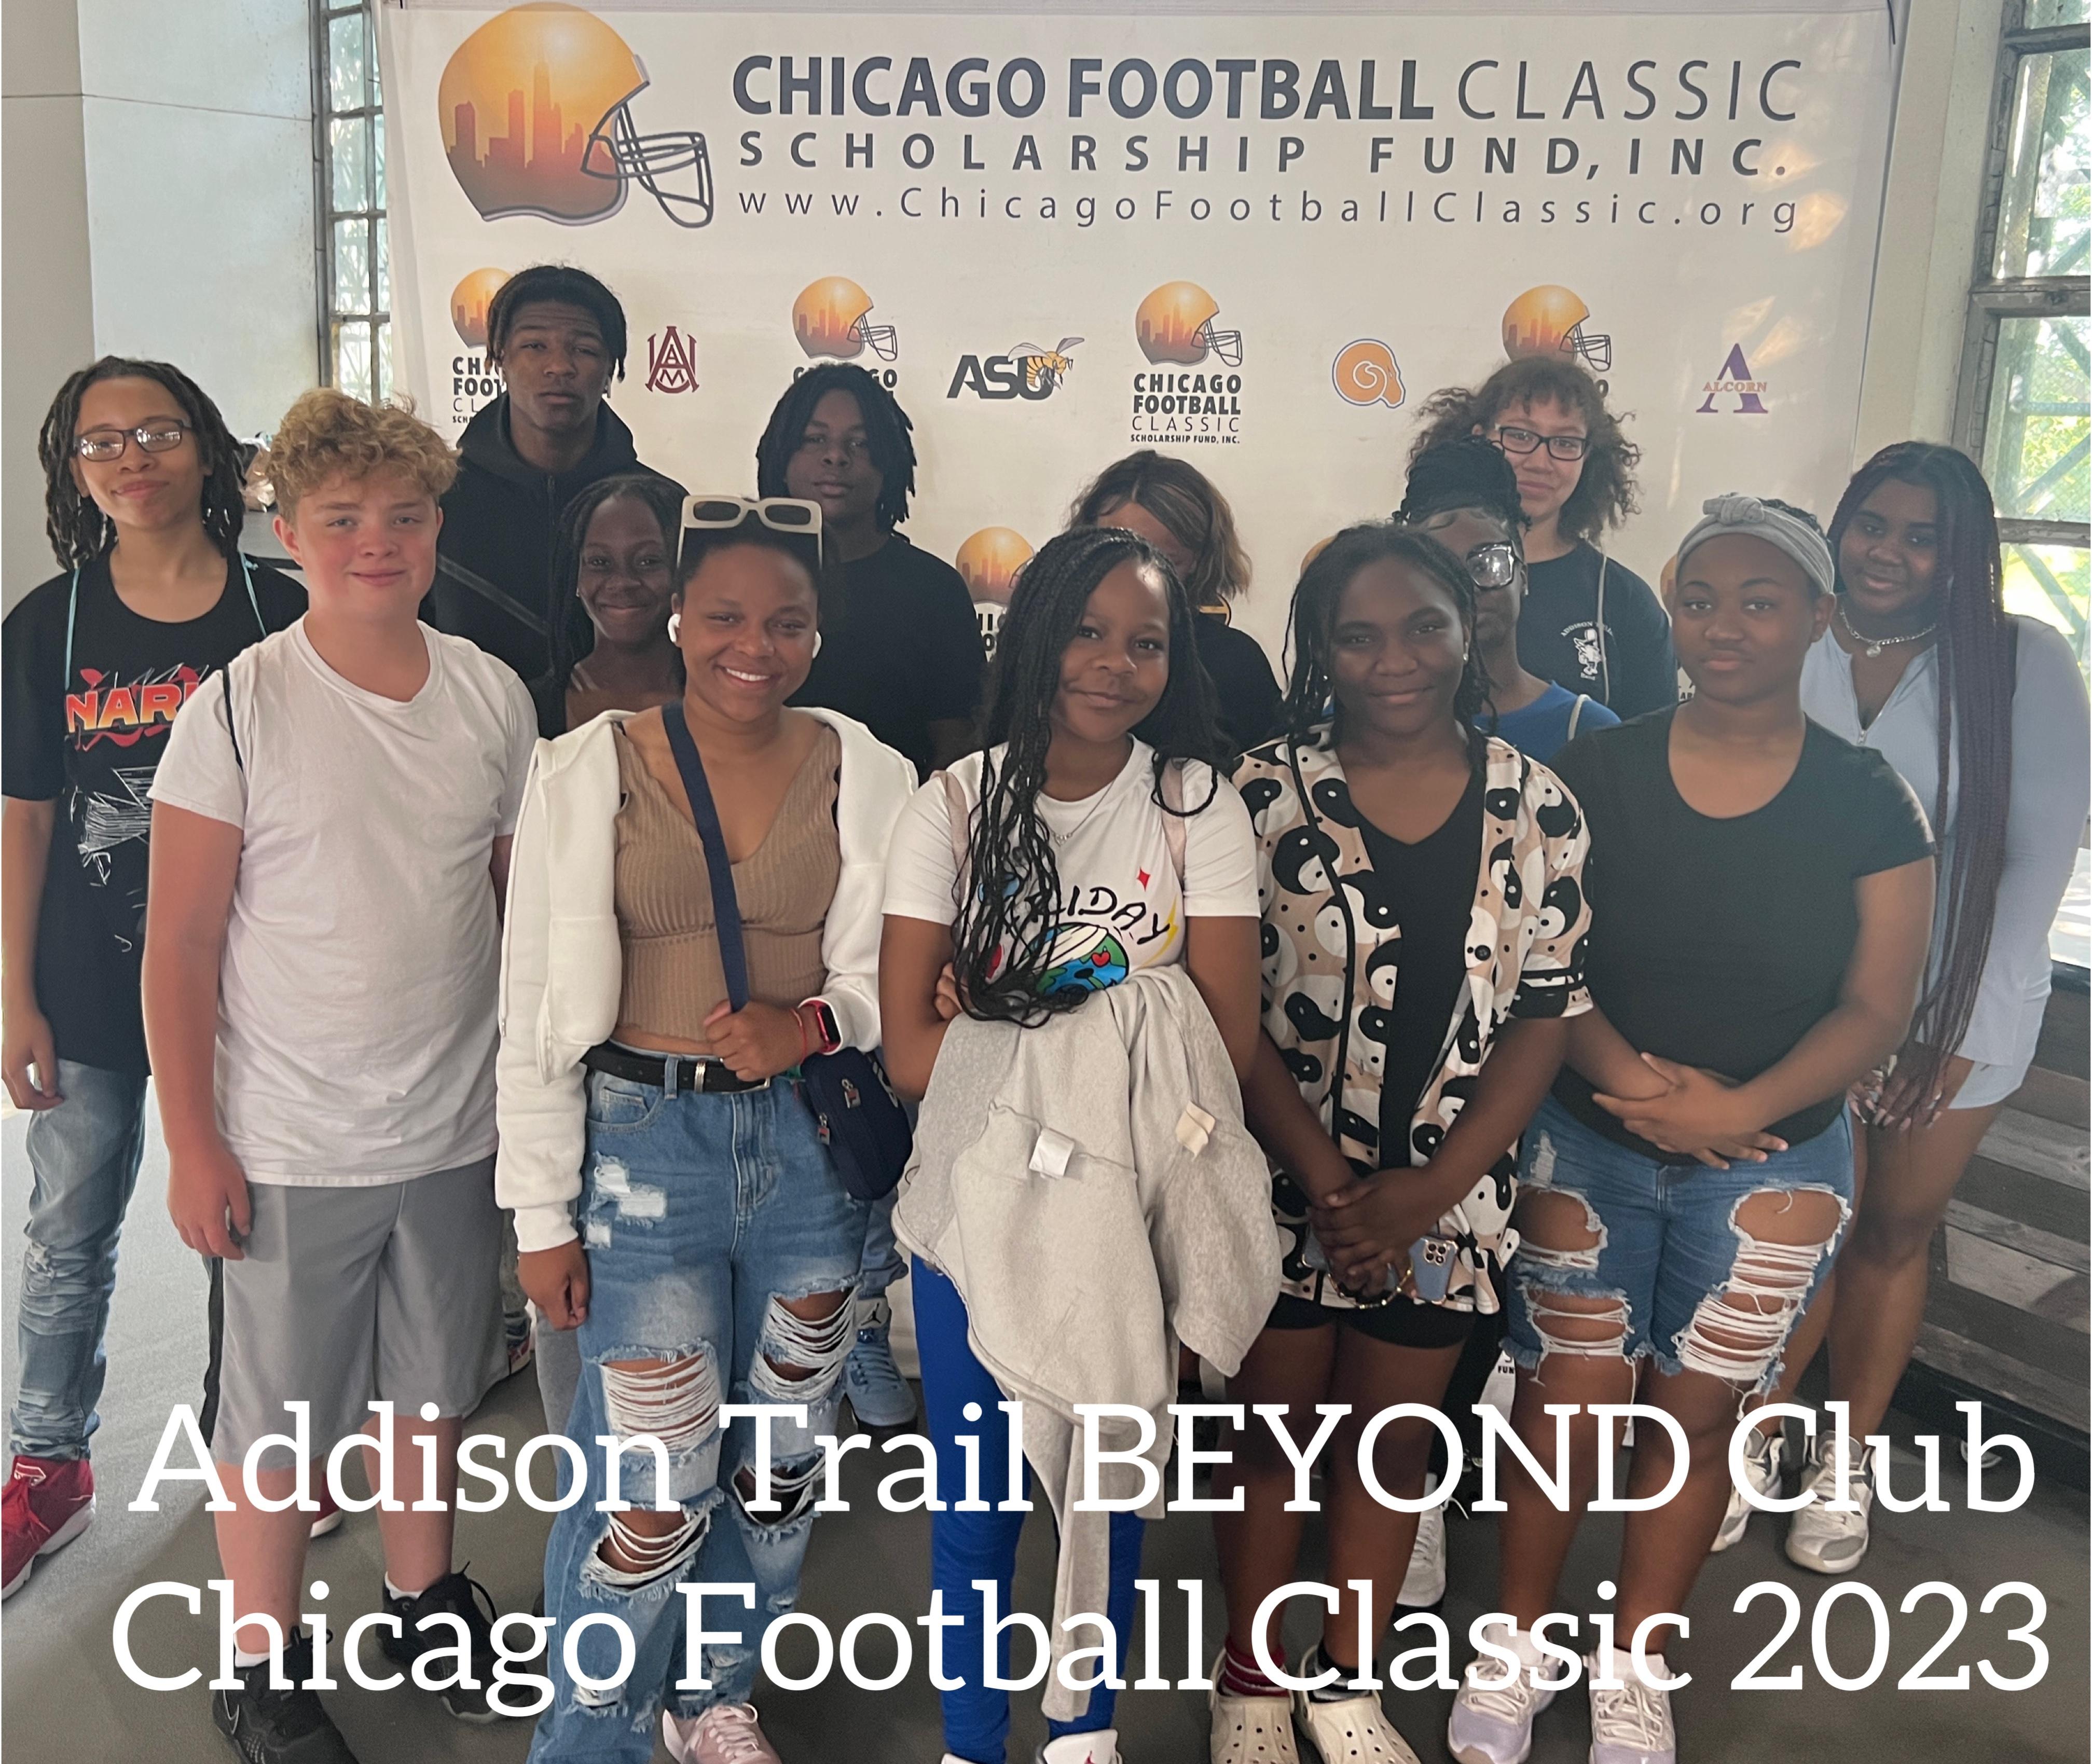 Addison Trail BEYOND Club attends Chicago Football Classic to learn about HBCUs